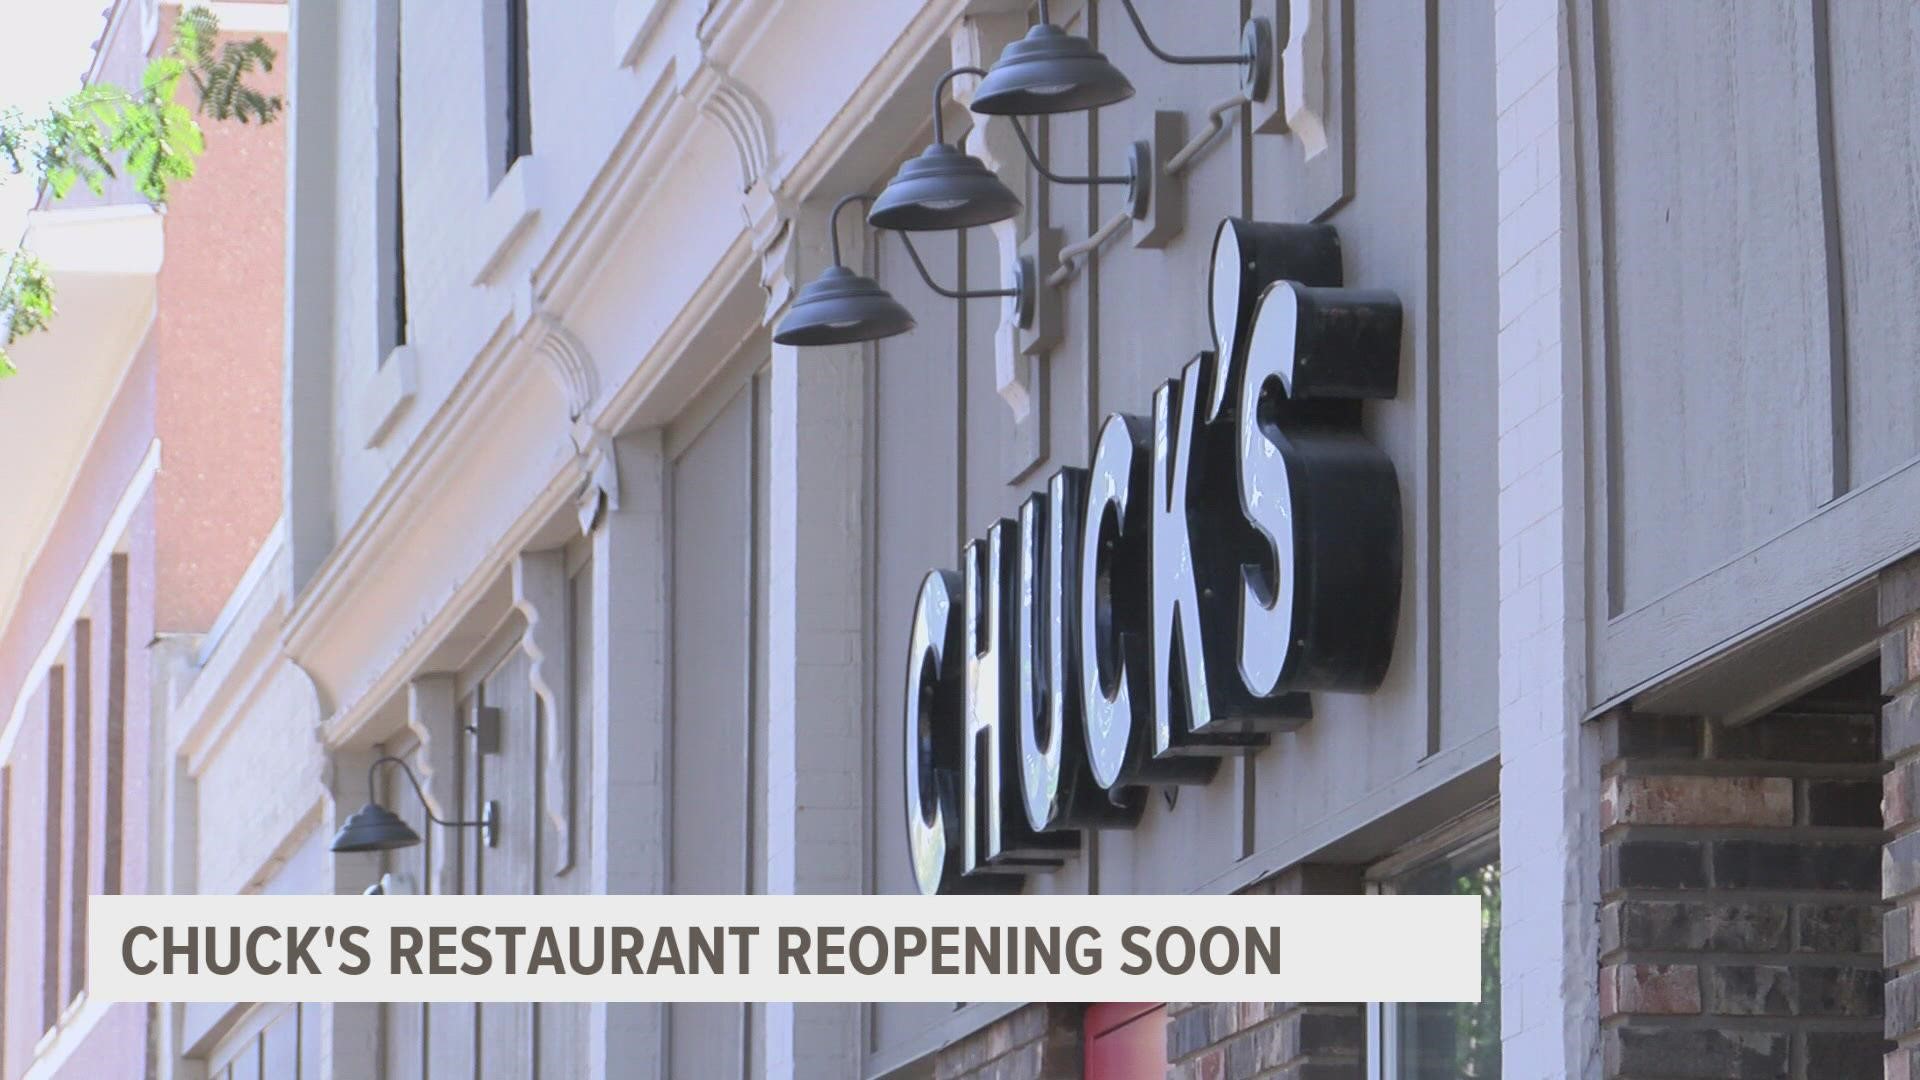 After being closed for almost a year due to renovations, Chuck's Restaurant on the northside of Des Moines plans to open next month.